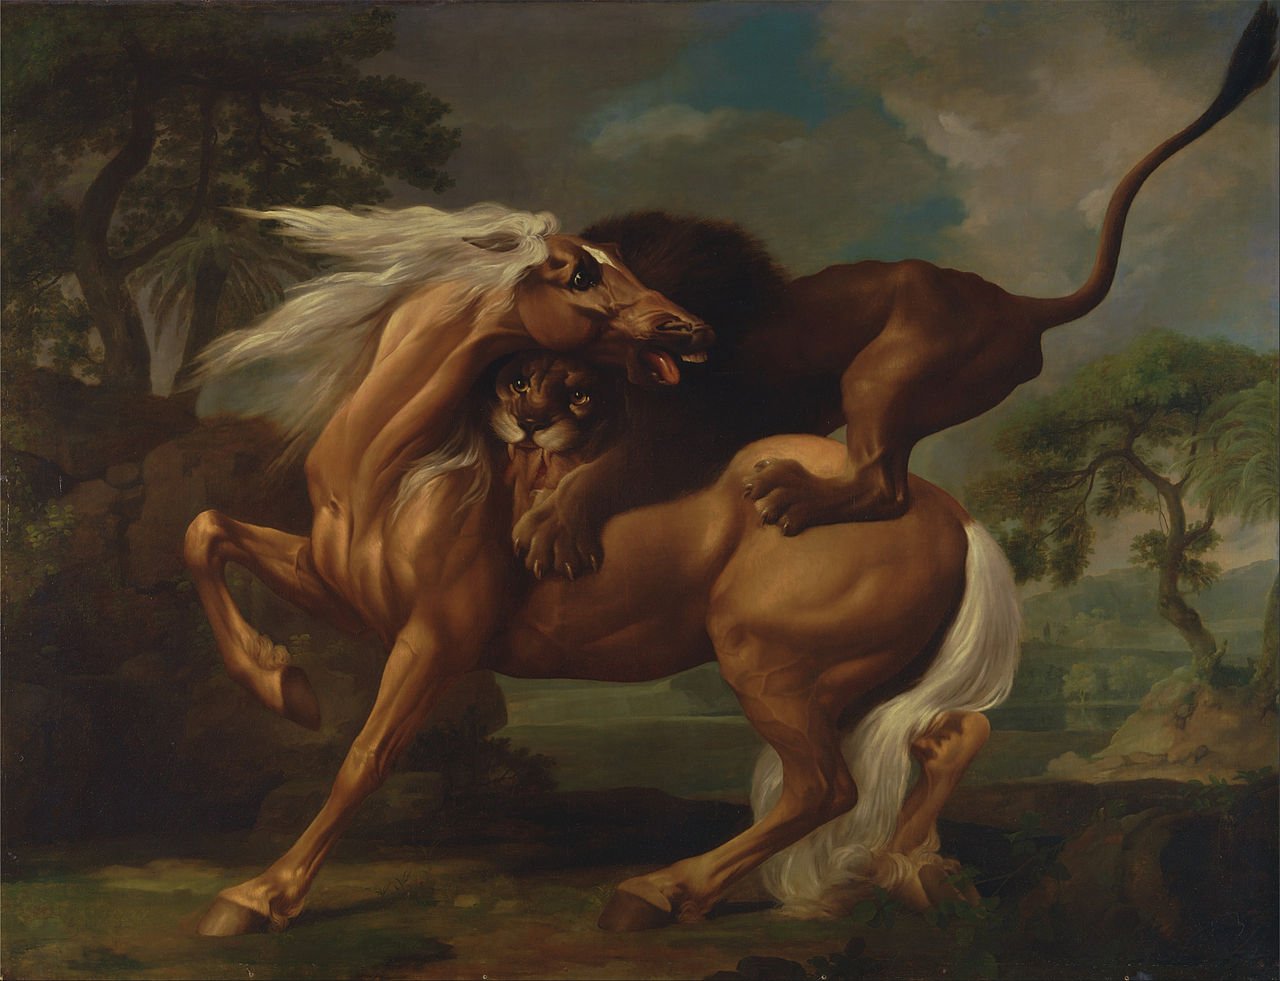 1280px-George-Stubbs-A-Lion-Attacking-a-Horse-Google-Art-Project.jpg